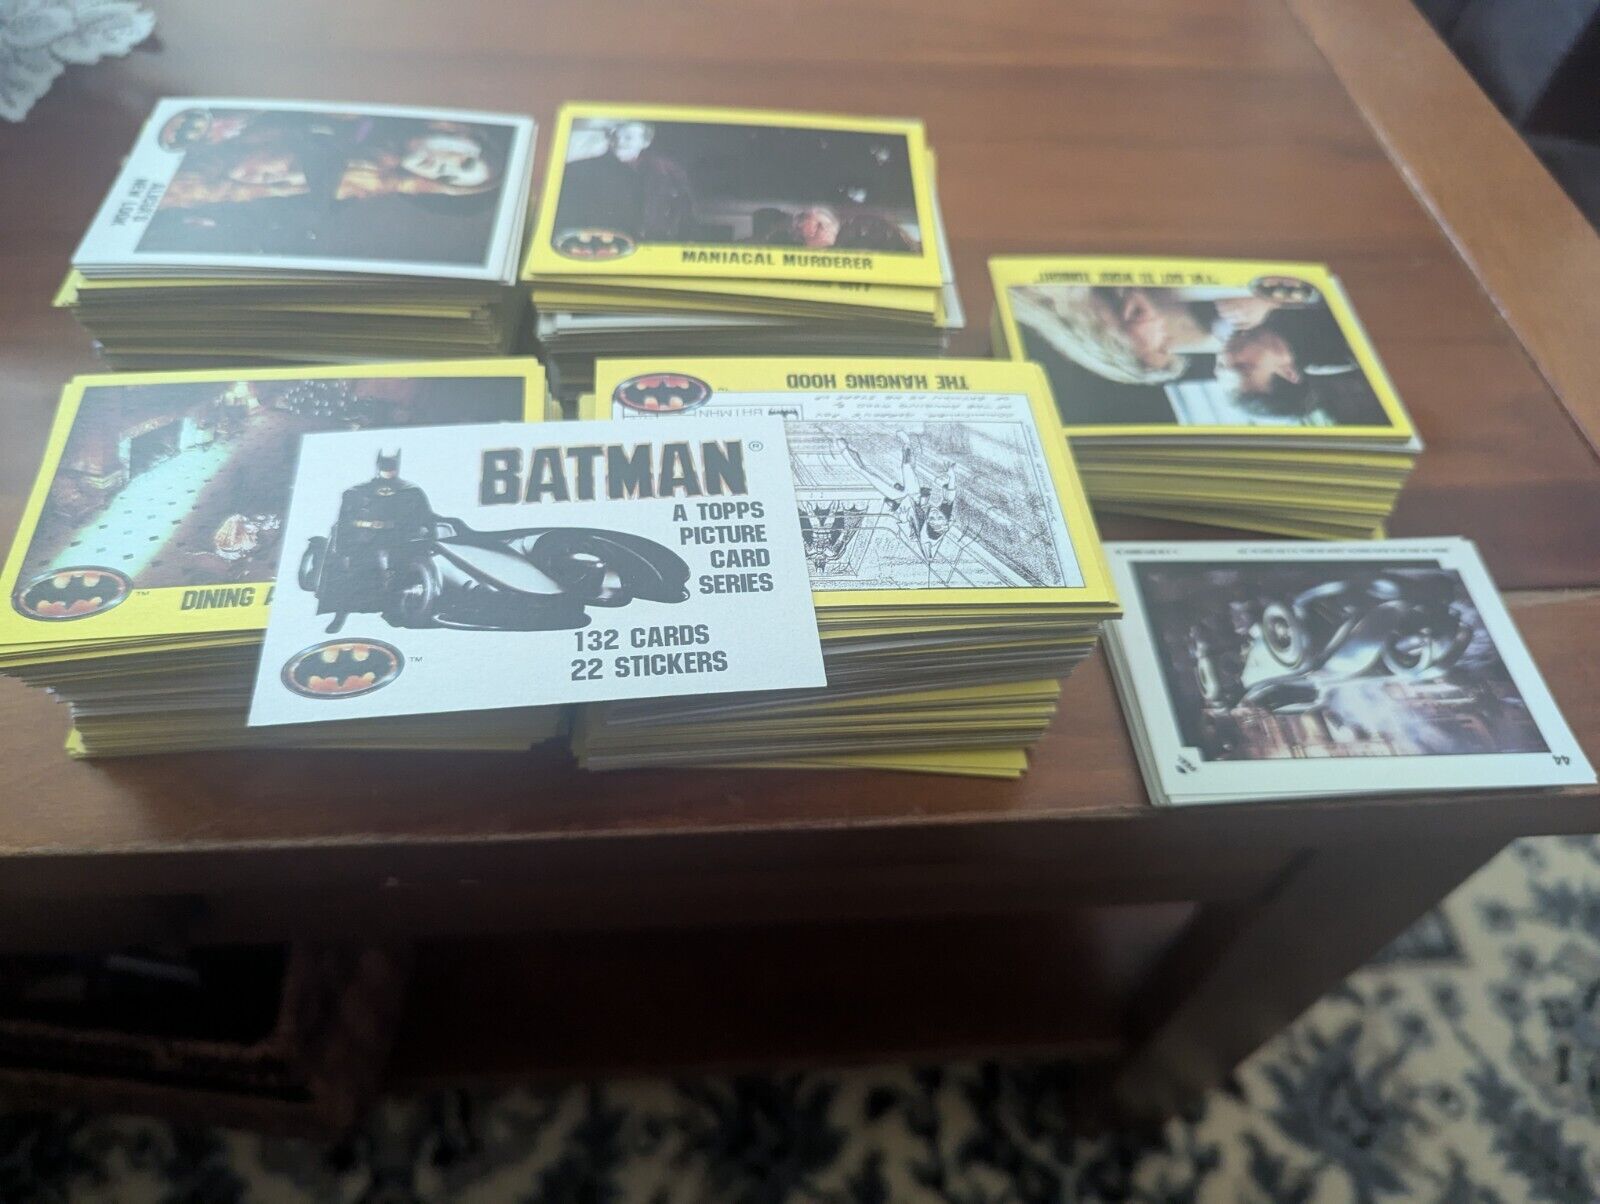 1989 Topps Batman Movie Cards Lot of 450 Trading Cards And 15 Sticker Cards